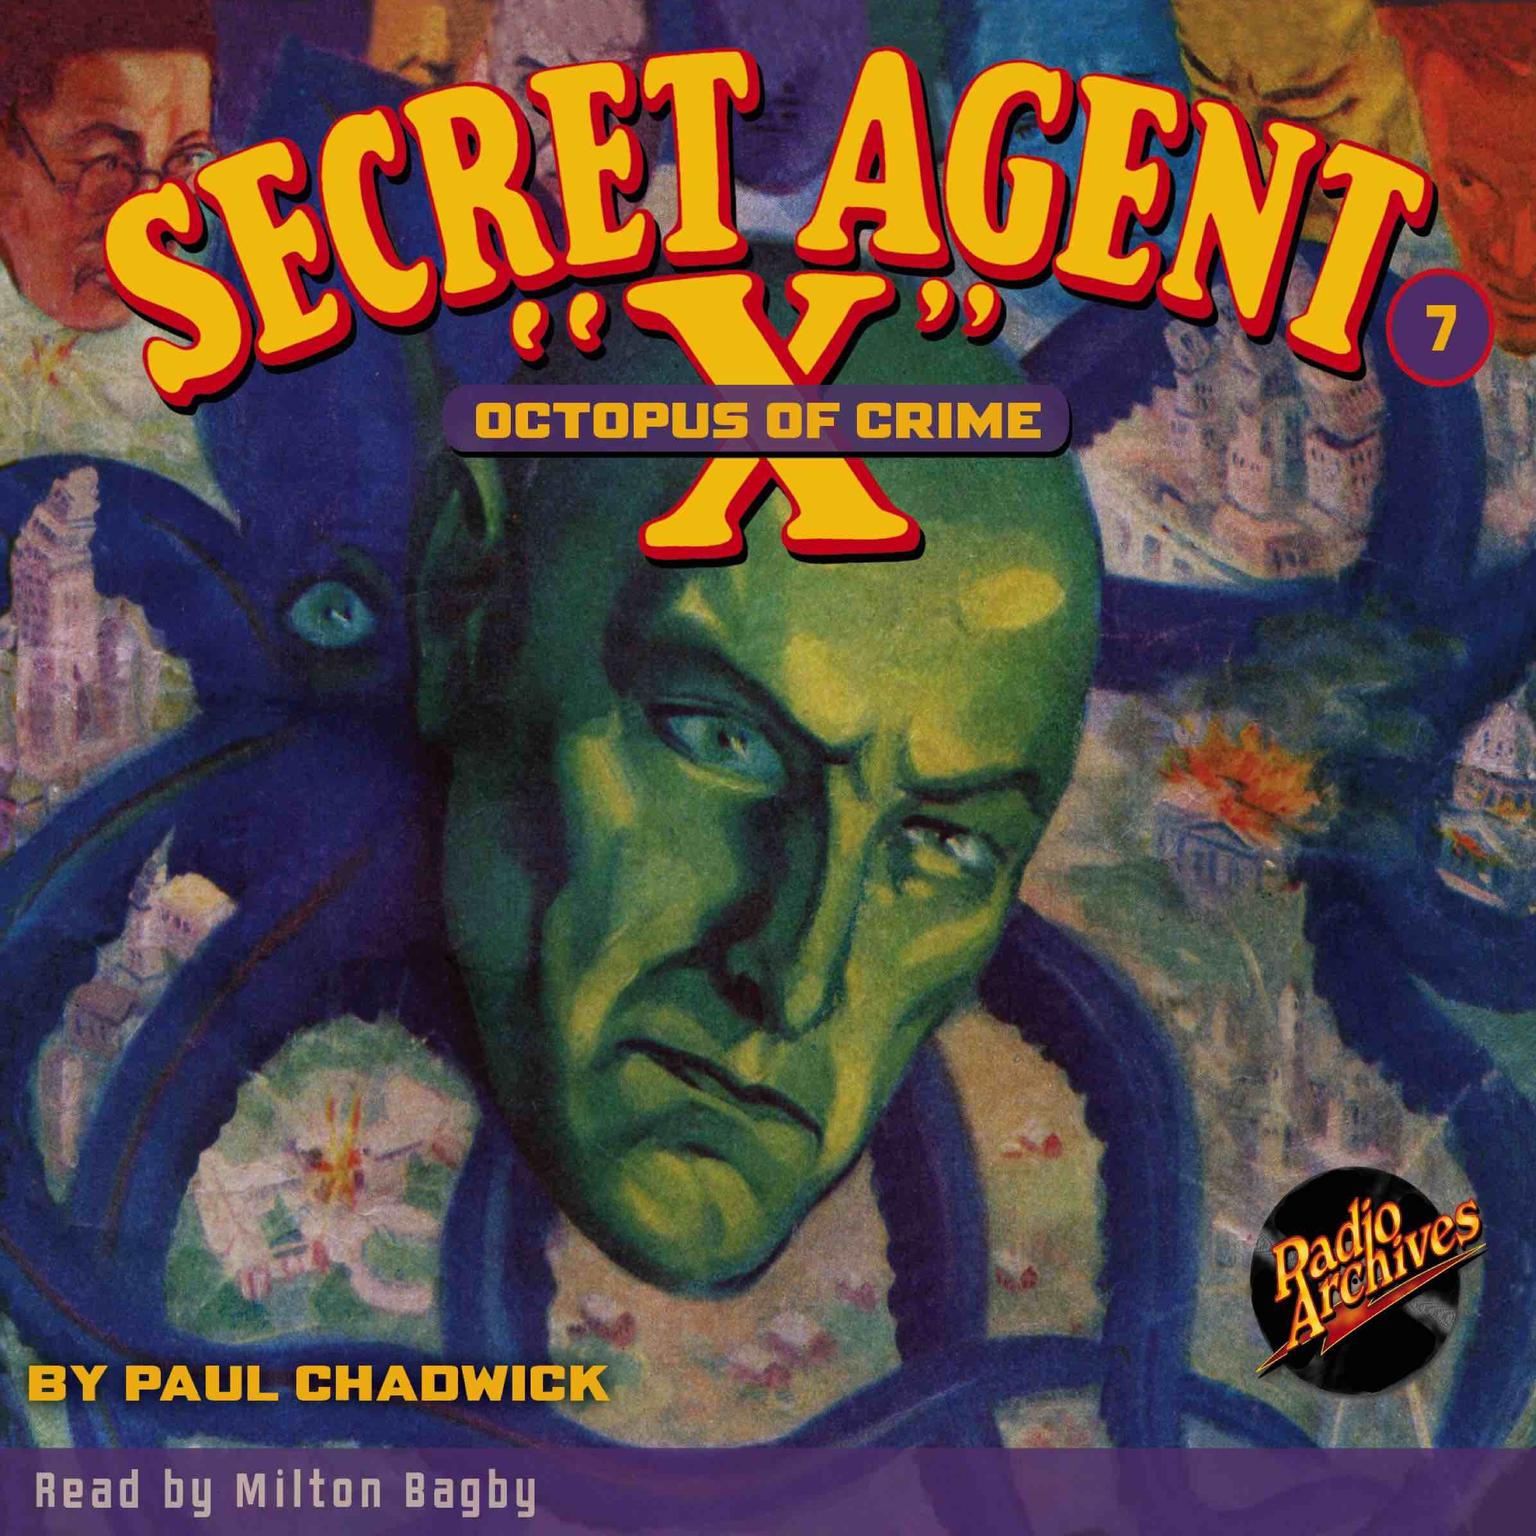 Secret Agent X: Octopus of Crime Audiobook, by Paul Chadwick